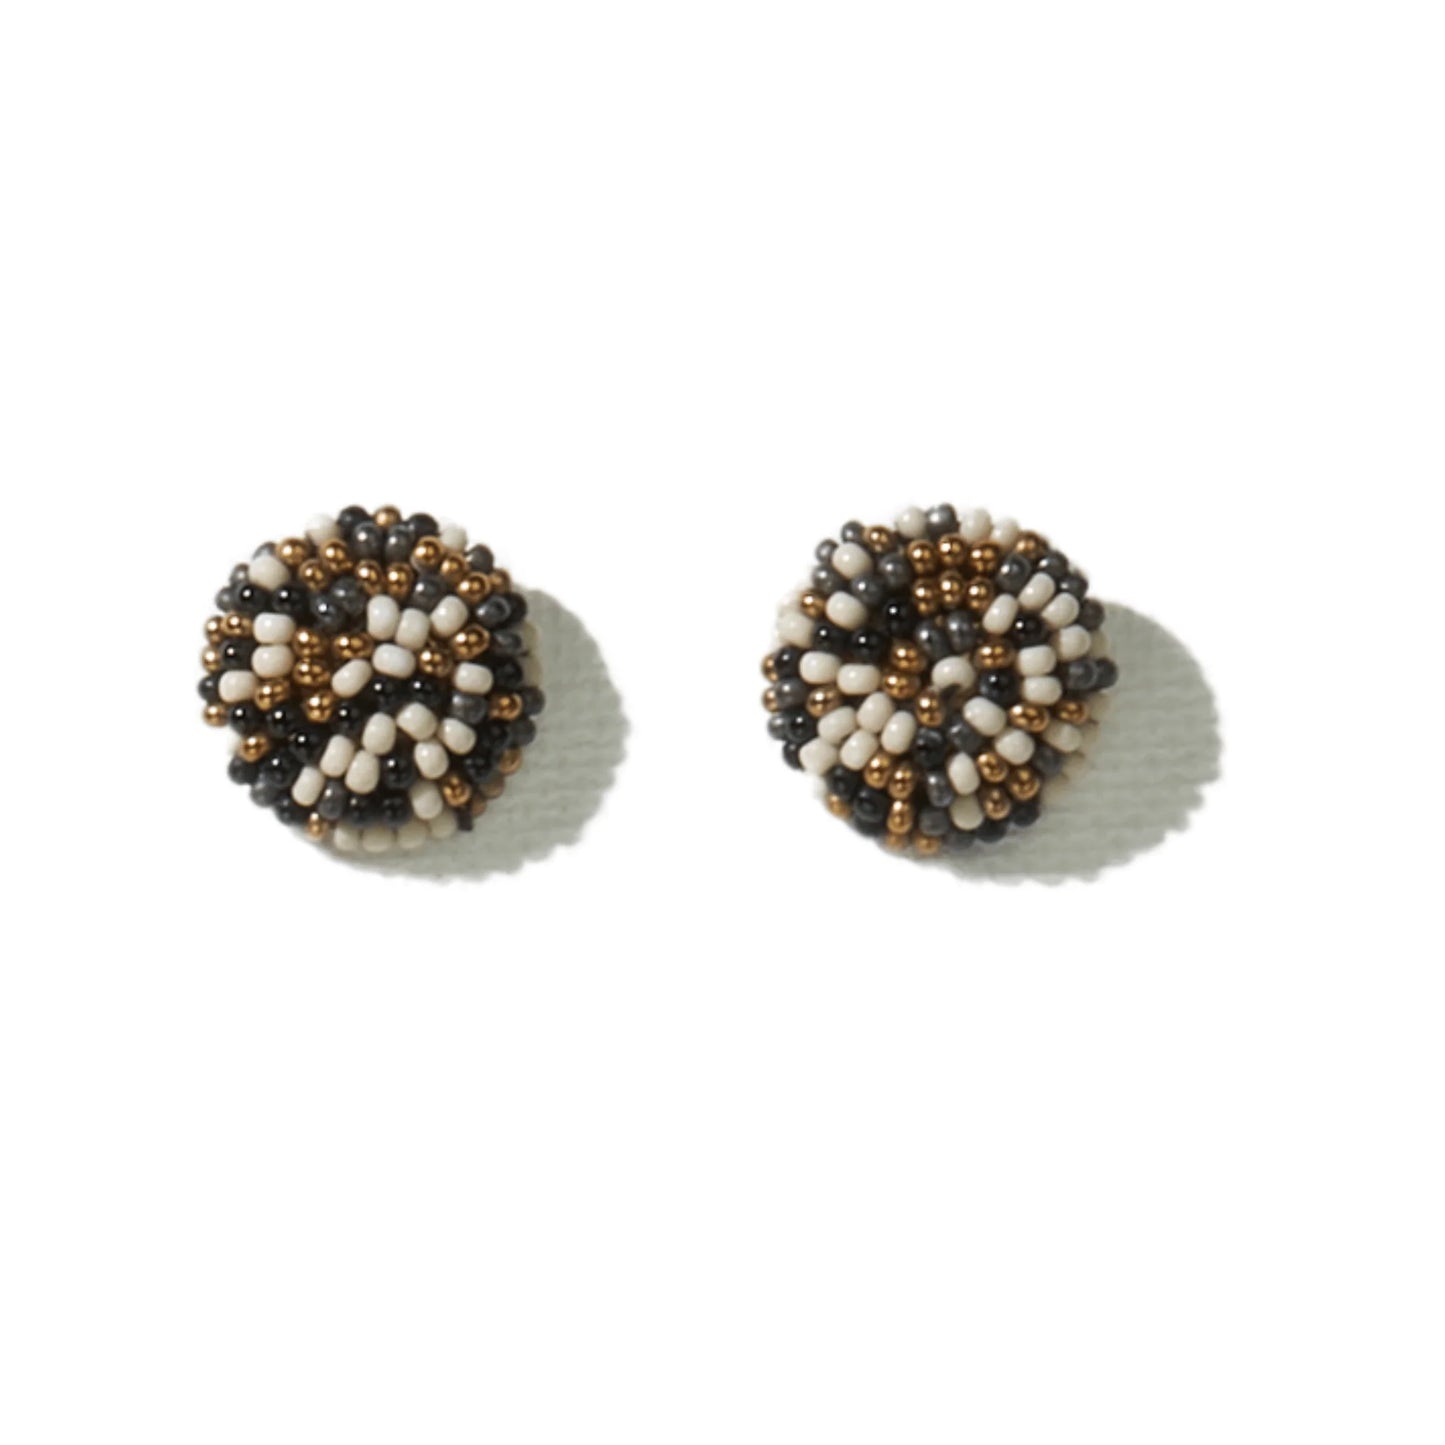 Black and White Confetti Small Post Earring .5"